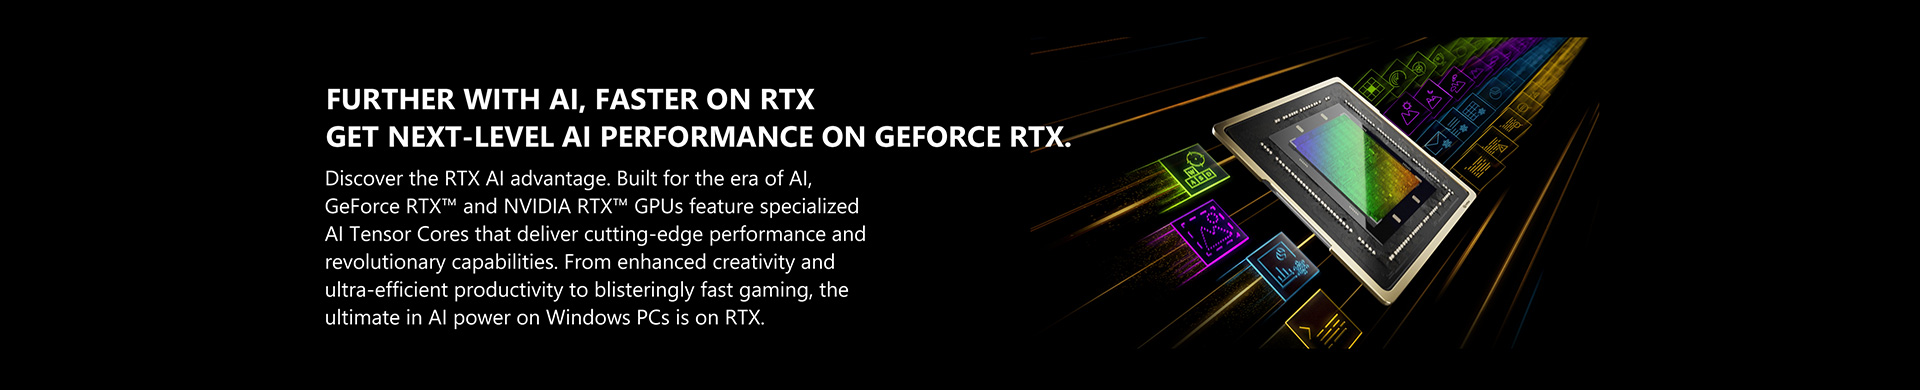 Discover the RTX AI advantage. Built for the era of AI, GeForce RTX™ and NVIDIA RTX™ GPUs feature specialized AI Tensor Cores that deliver cutting-edge performance and revolutionary capabilities. From enhanced creativity and ultra-efficient productivity to blisteringly fast gaming, the ultimate in AI power on Windows PCs is on RTX.